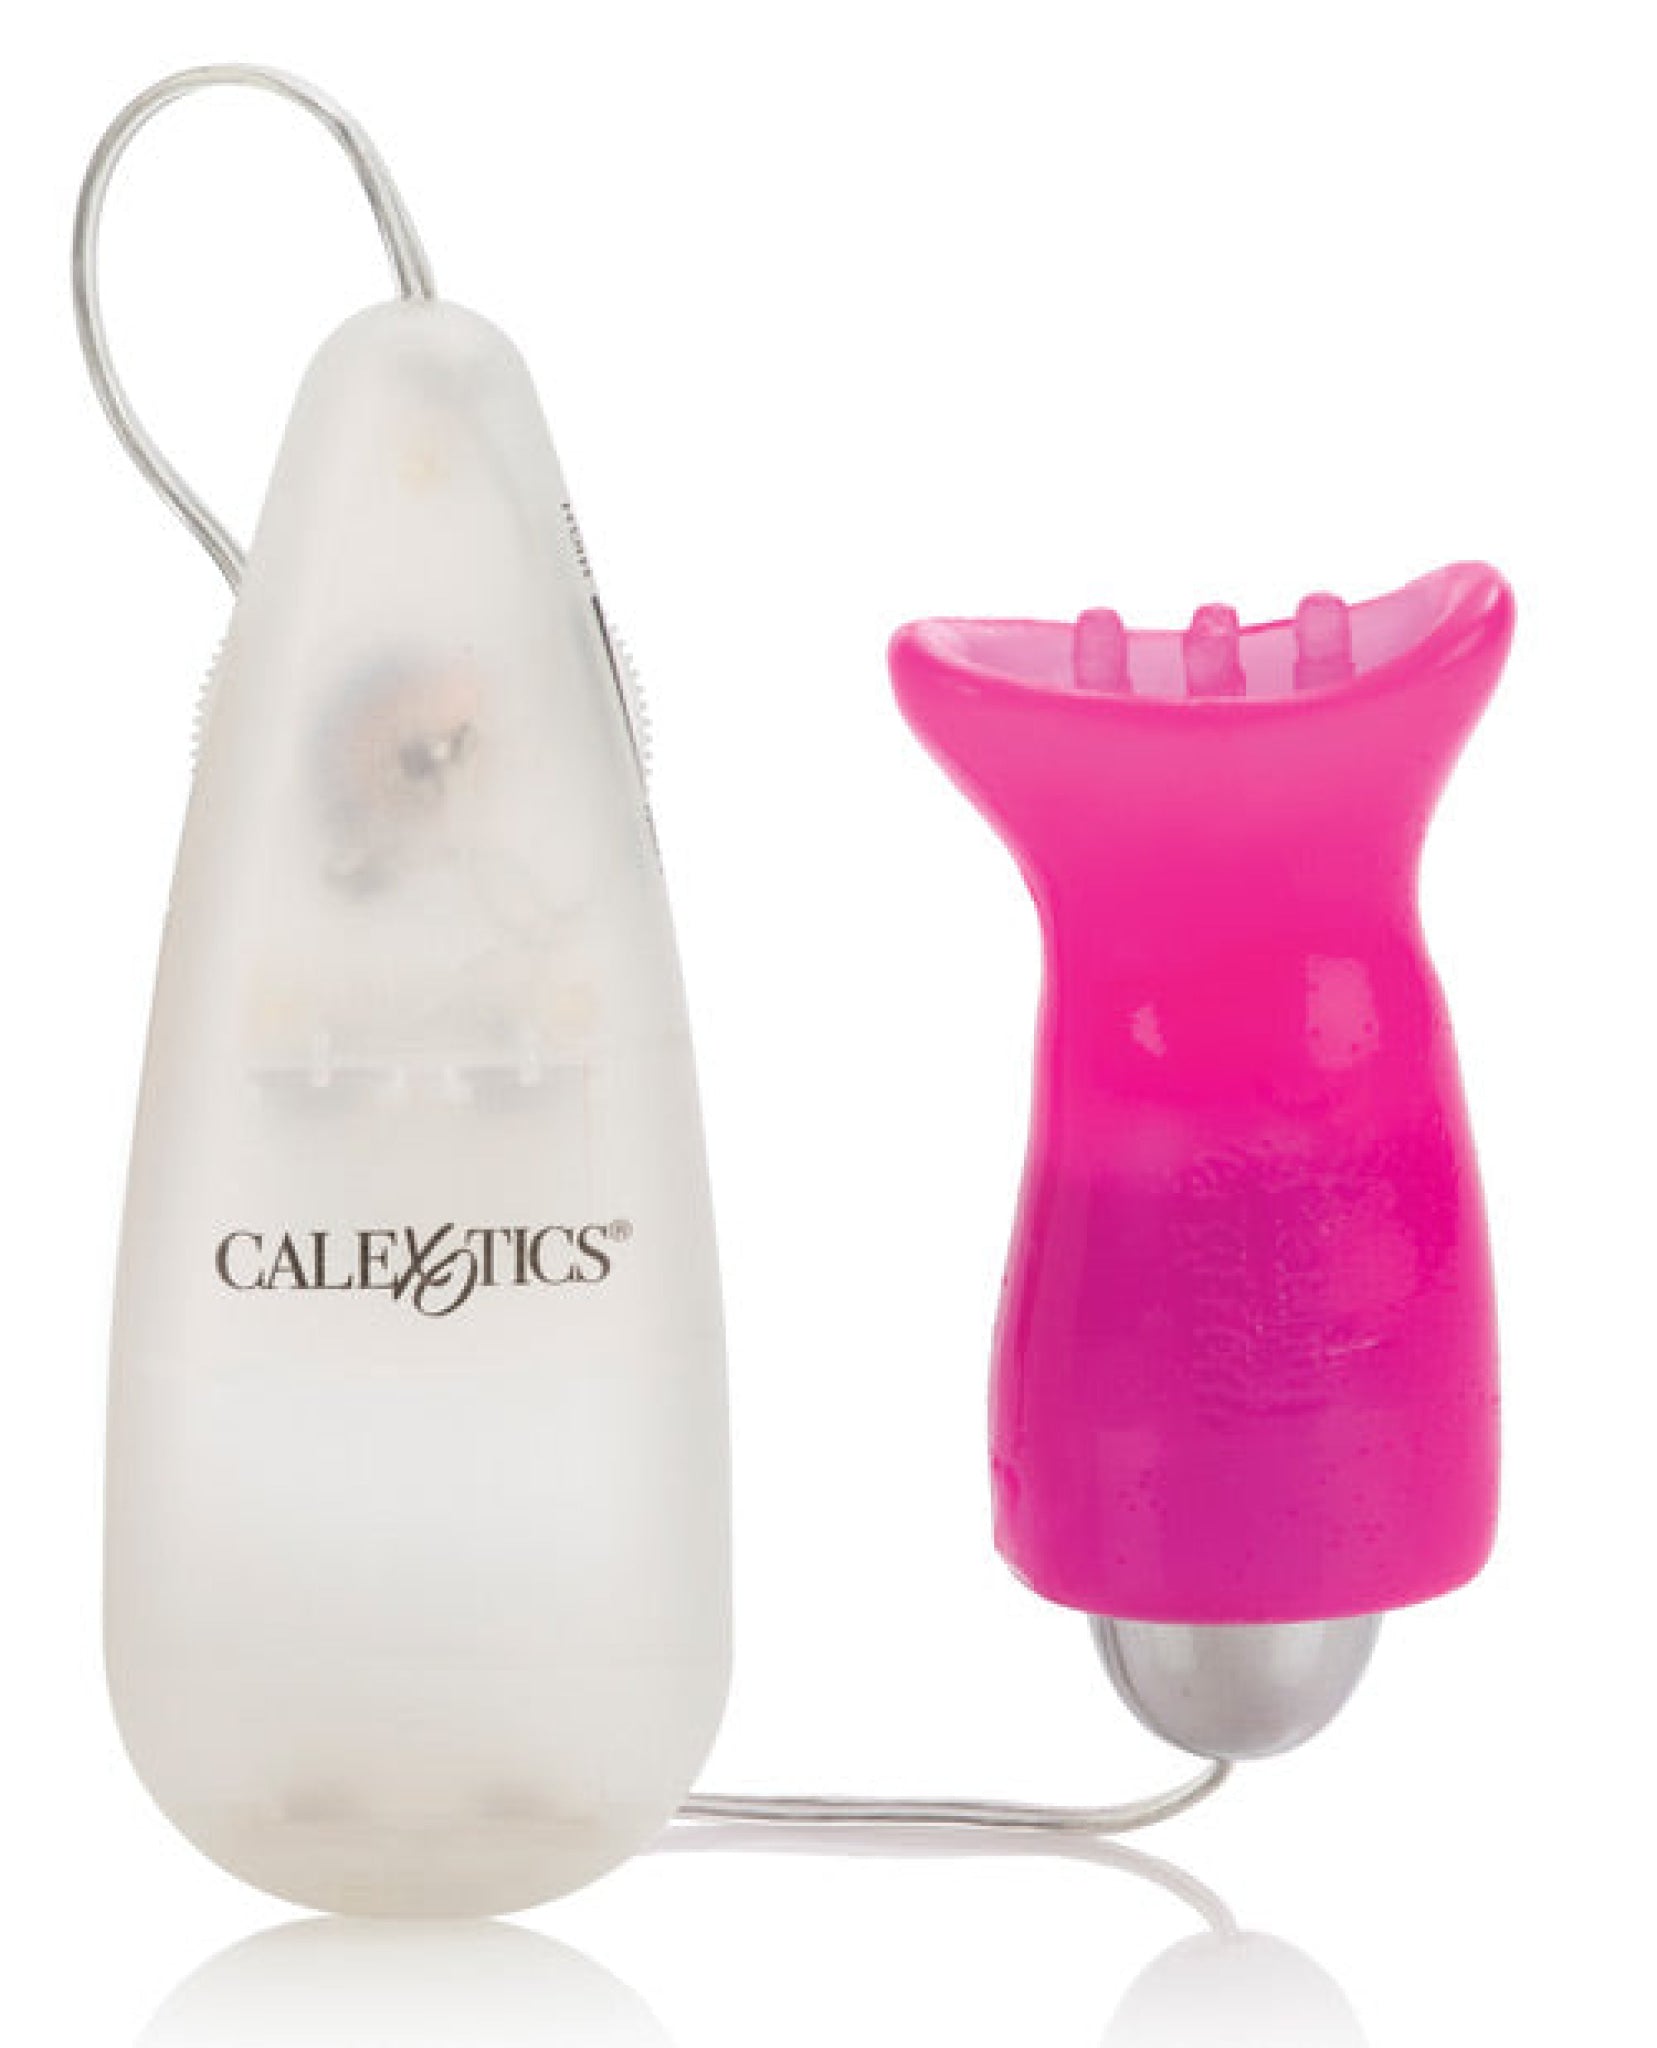 Pussy Pleaser Clit Arouser - Pink California Exotic Novelties